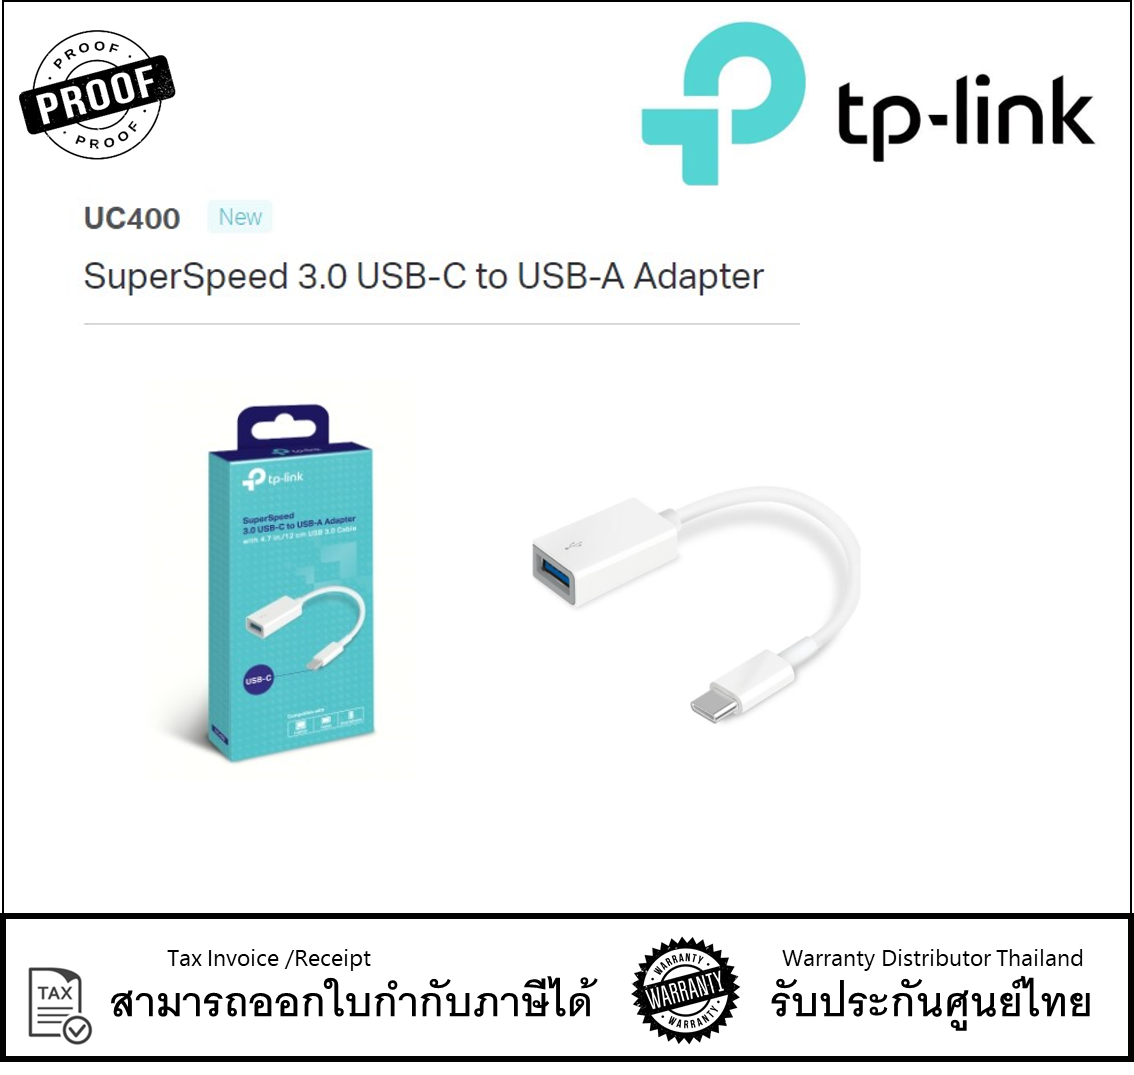 TP LINK UC400 New SuperSpeed 3.0 USB-C to USB-A Adapter  Universal Compatibility USB 3.0 PORT